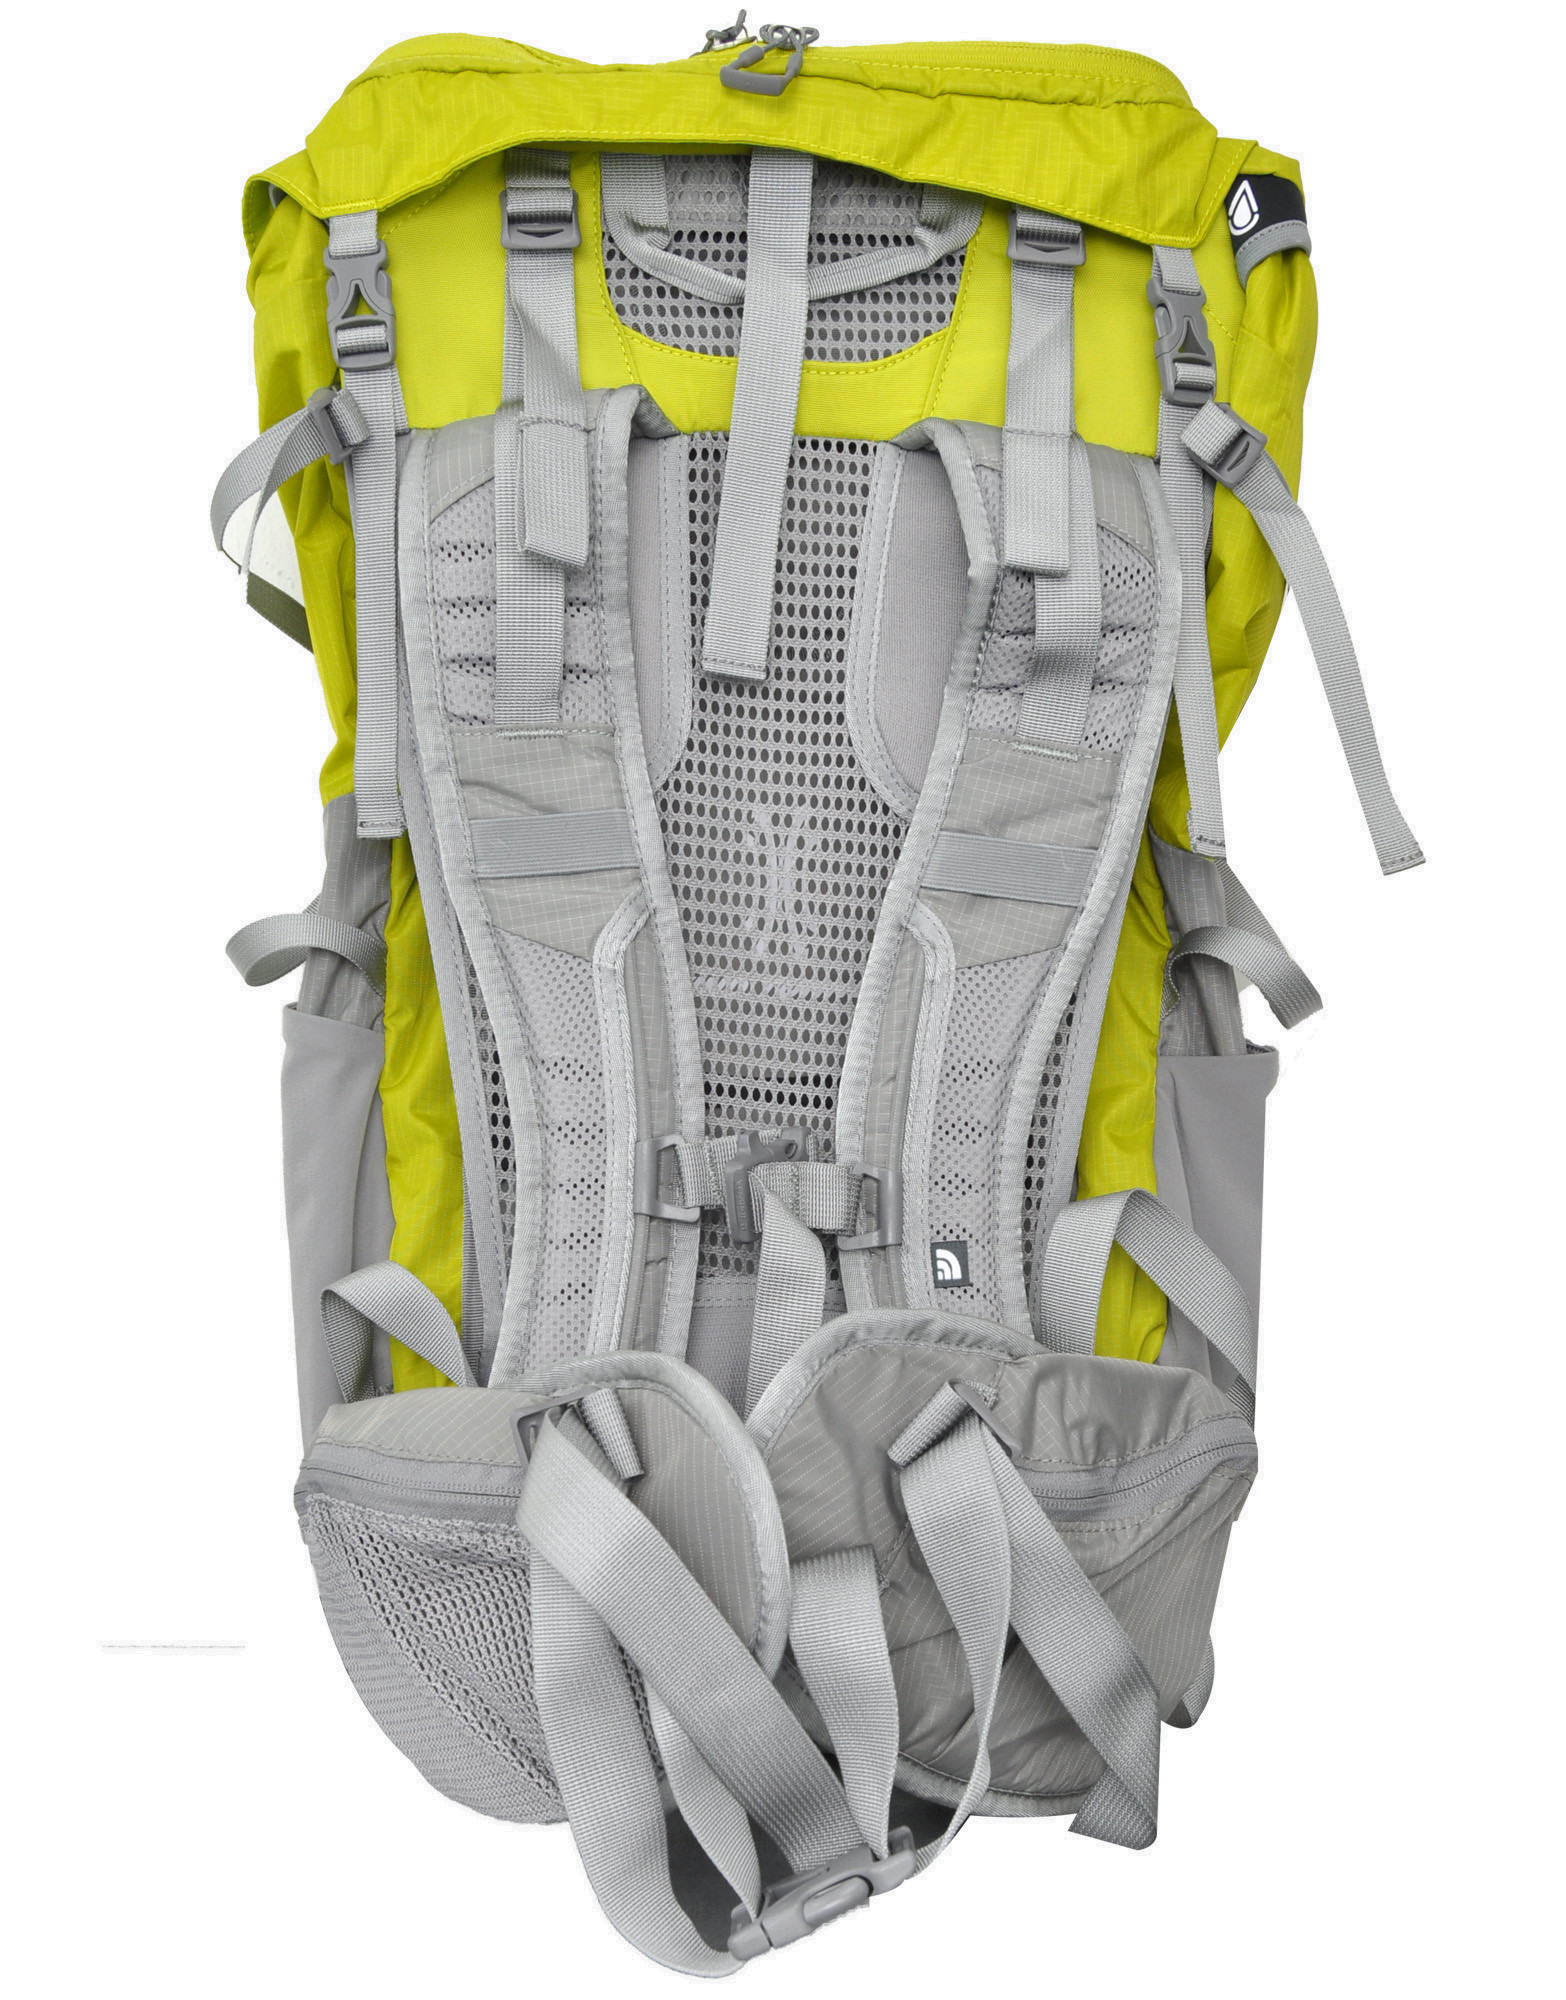 Alteo 35 Backpack by THE NORTH FACE (colour: yellow)